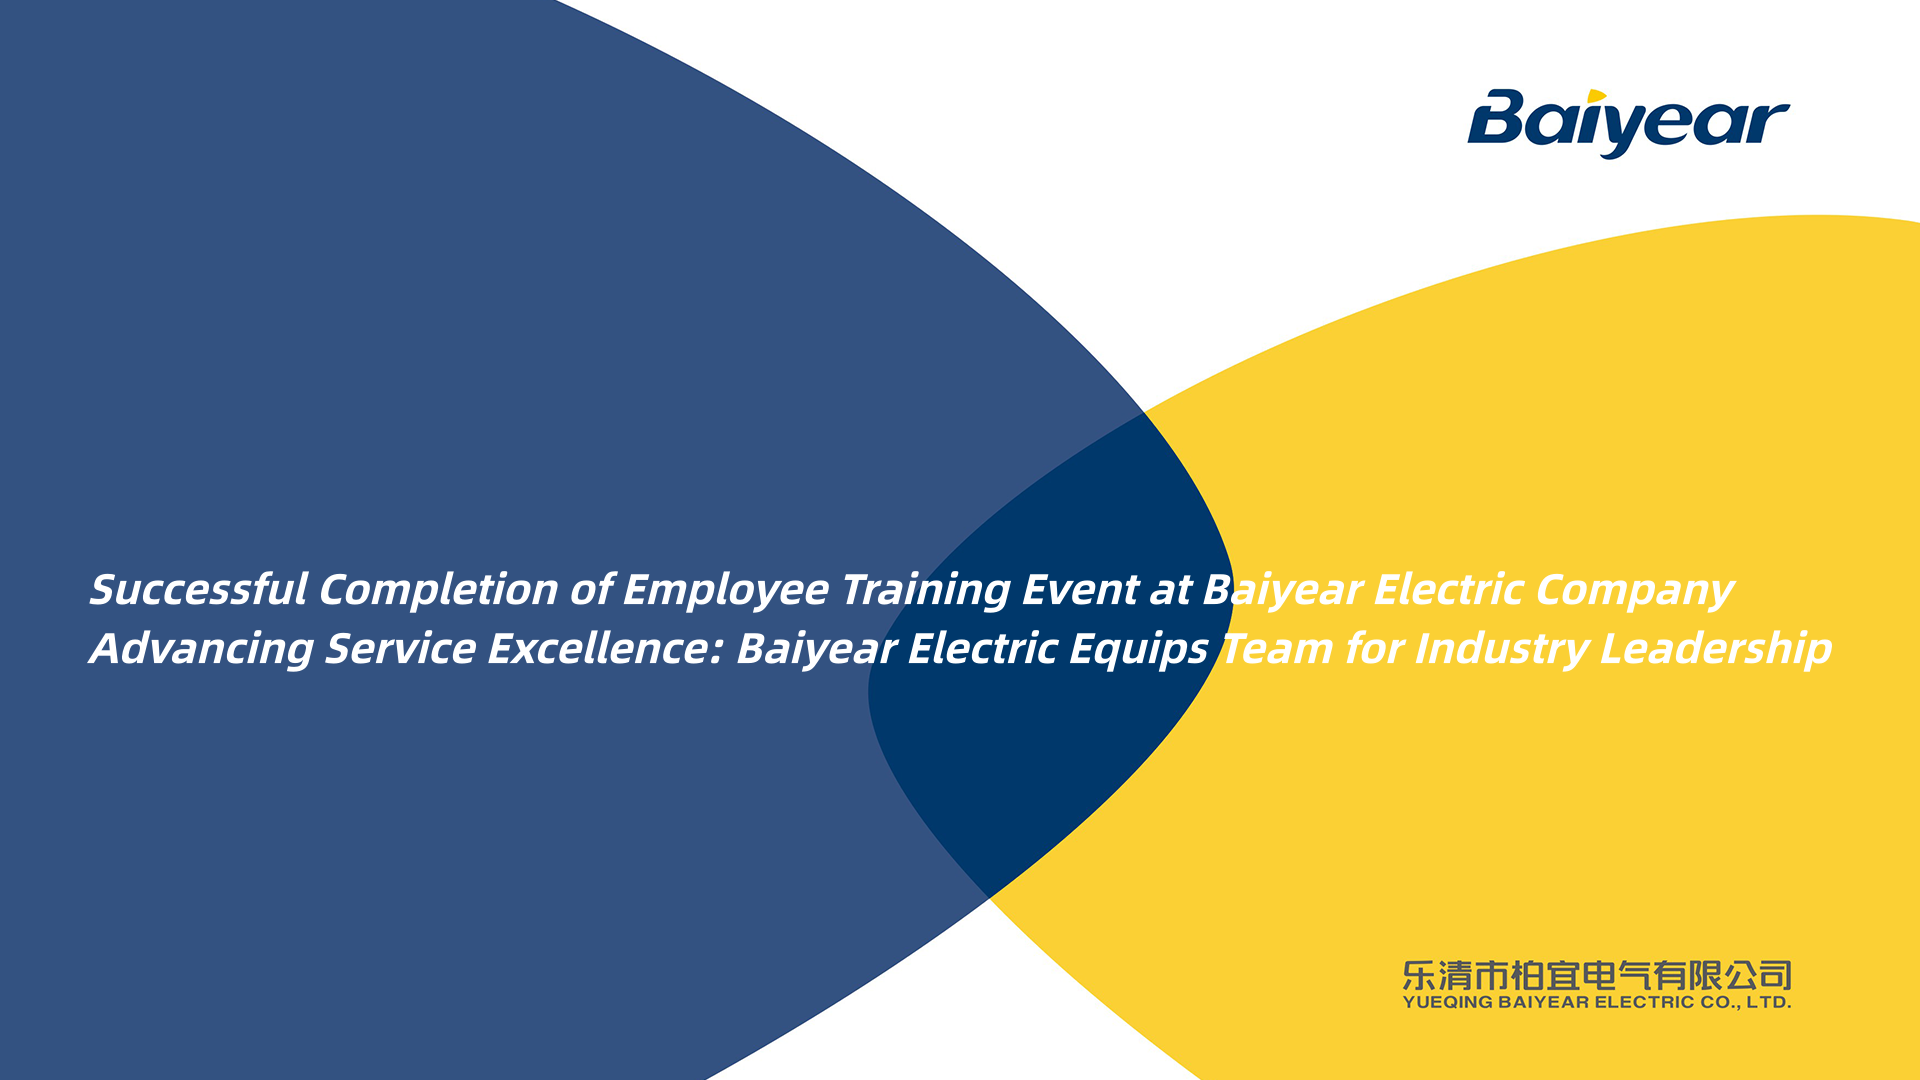 Successful Completion of Employee Training Event at Baiyear Electric Company Advancing Service Excellence: Baiyear Electric Equips Team for Industry Leadership